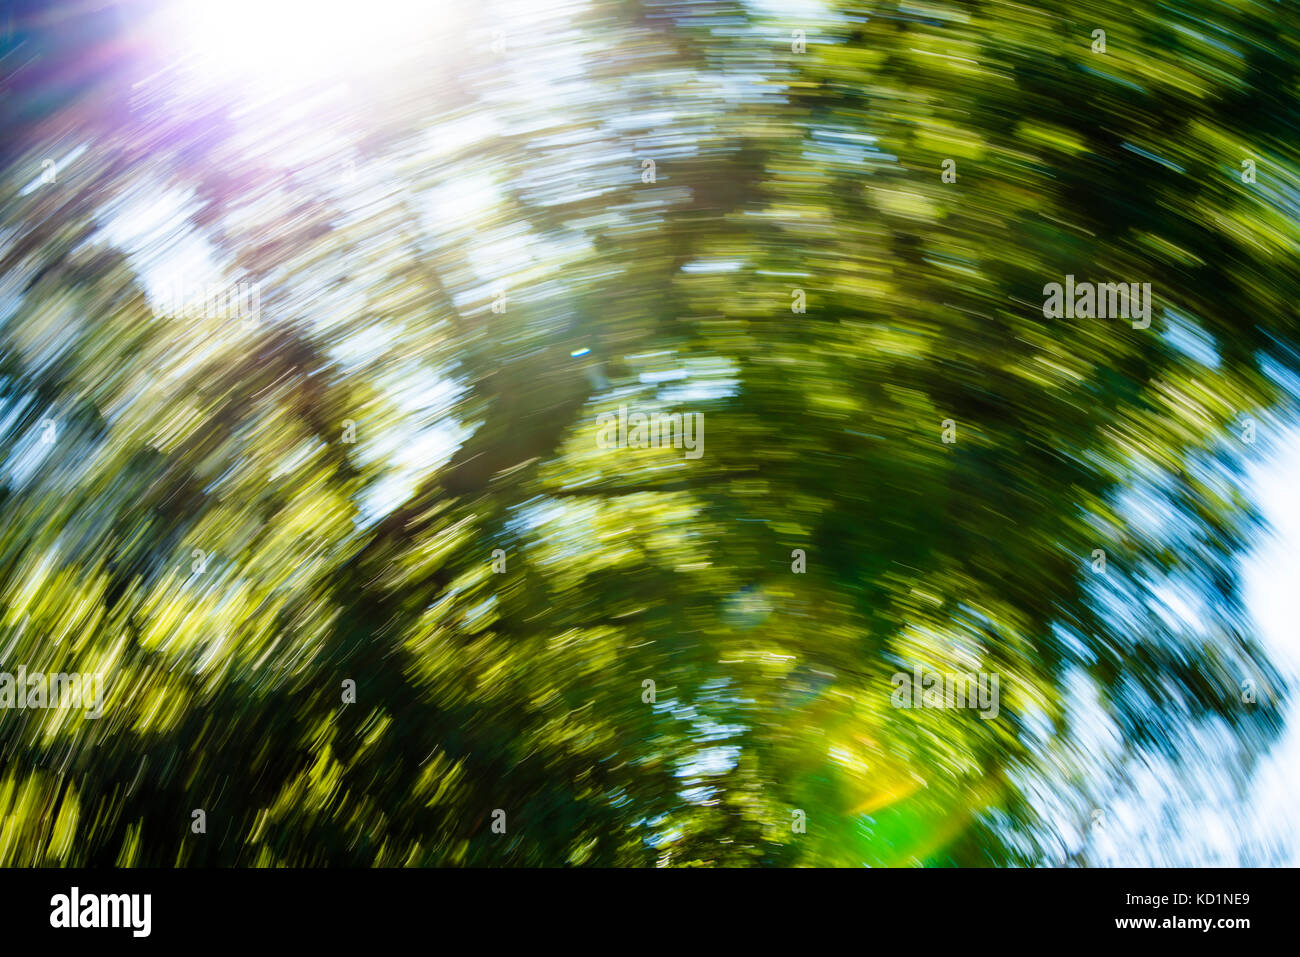 Spinning concept lookup up in forest at blurred trees Stock Photo